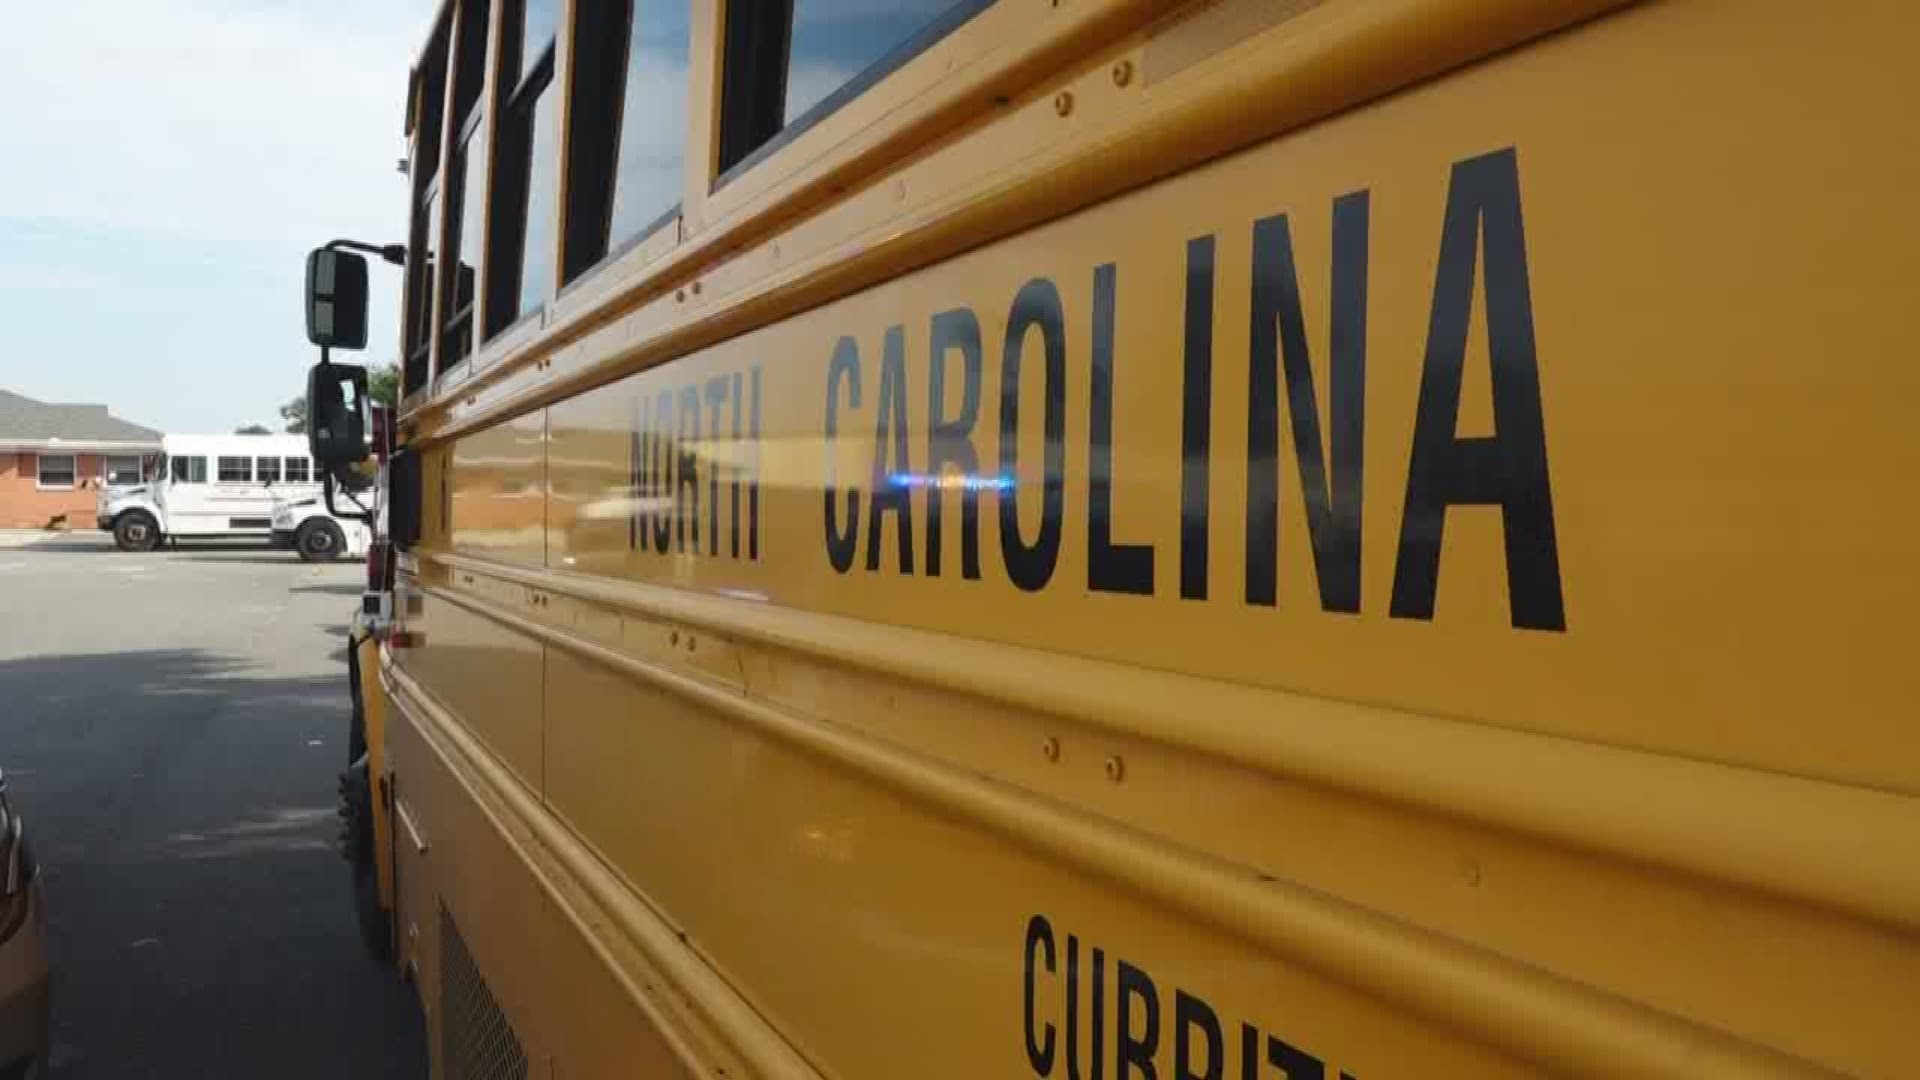 We bring you up to speed with school bus safety laws in North Carolina and Virginia.